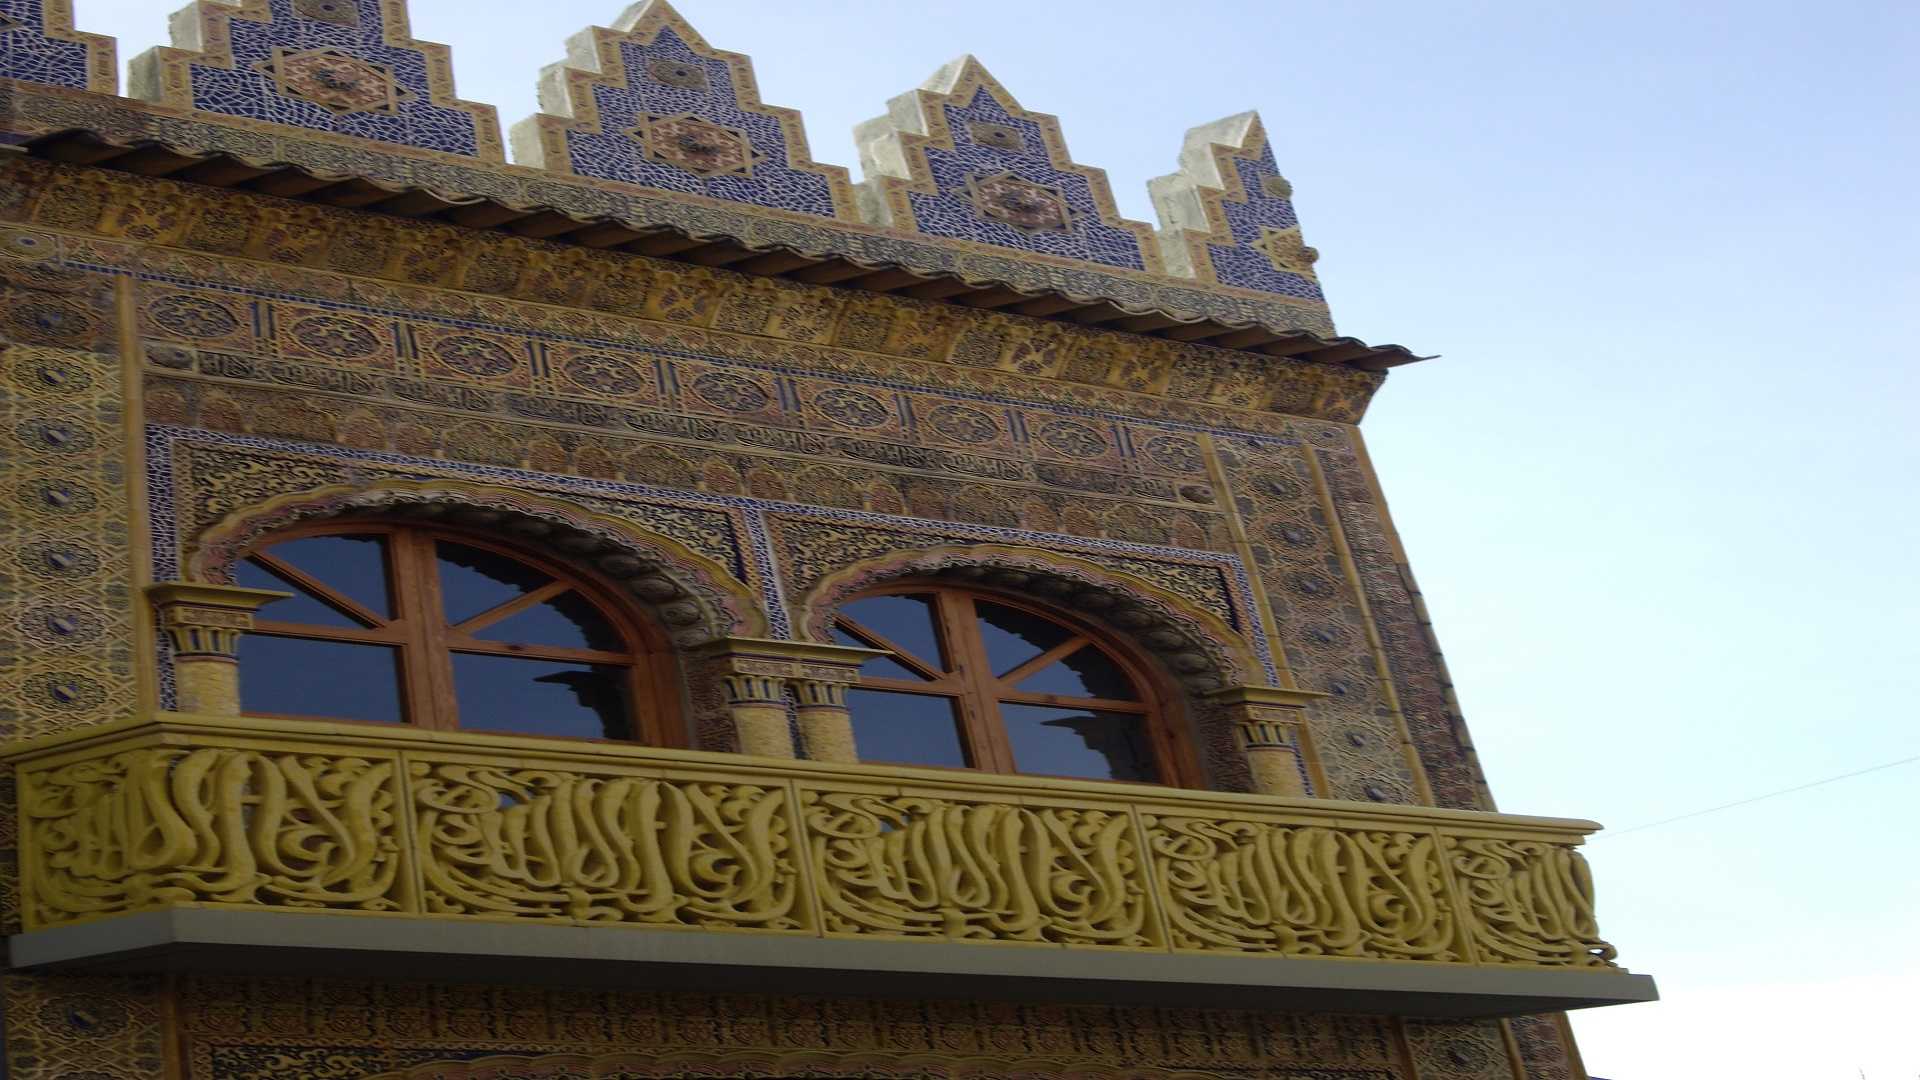 Upper part of the second body of the façade of El Arte where you can see the image of a balcony with two windows, in yellow and blue colors, in a Spanish-Arabic style, inspired by the plasterwork of the Alhambra.